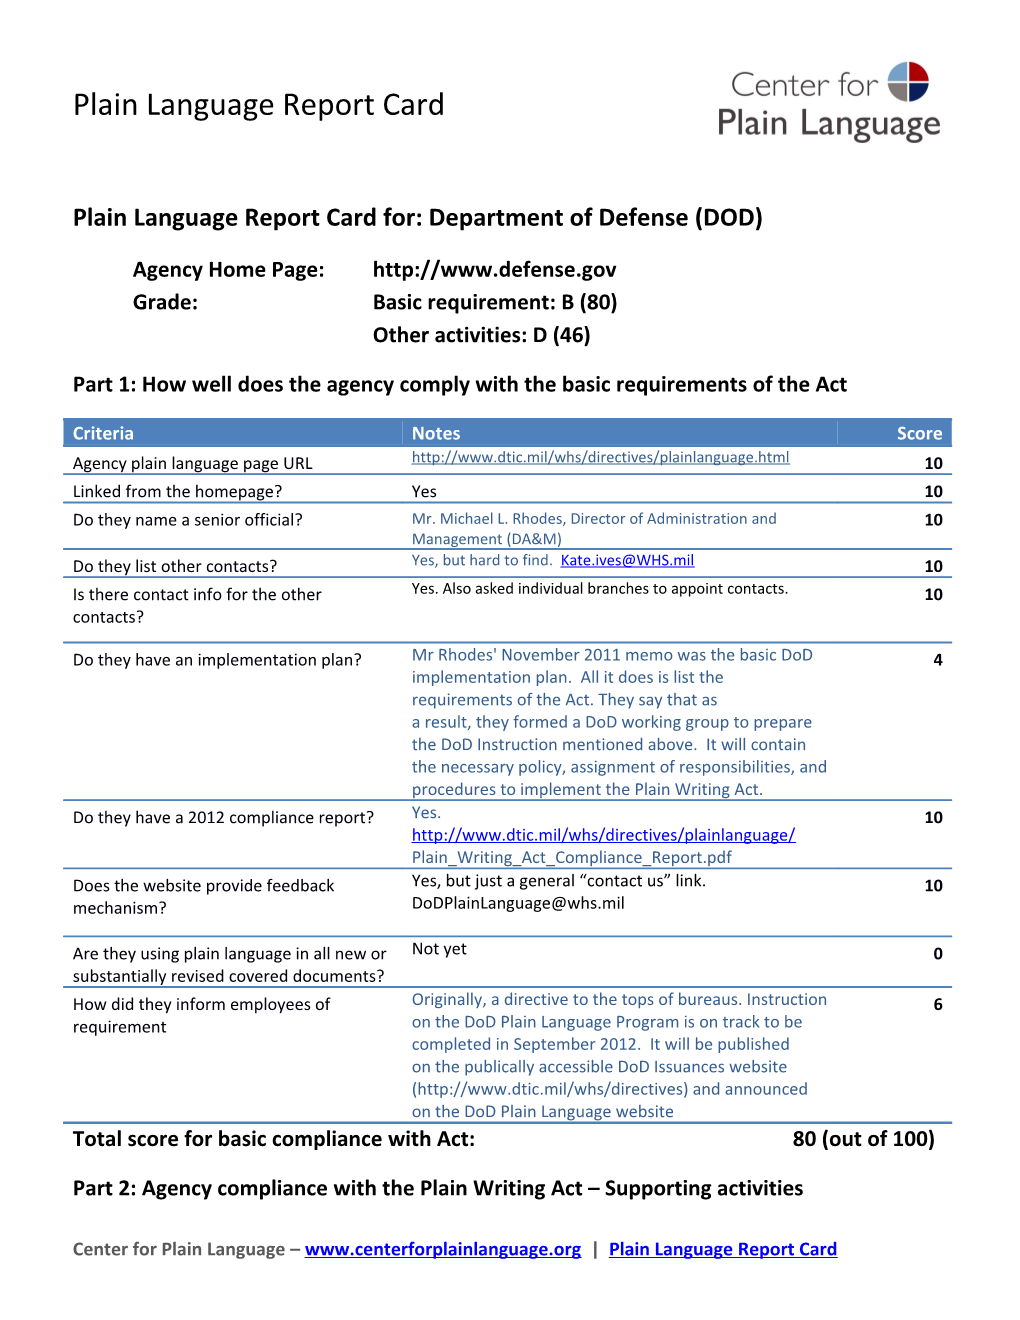 Plain Language Report Card For: Department of Defense (DOD)